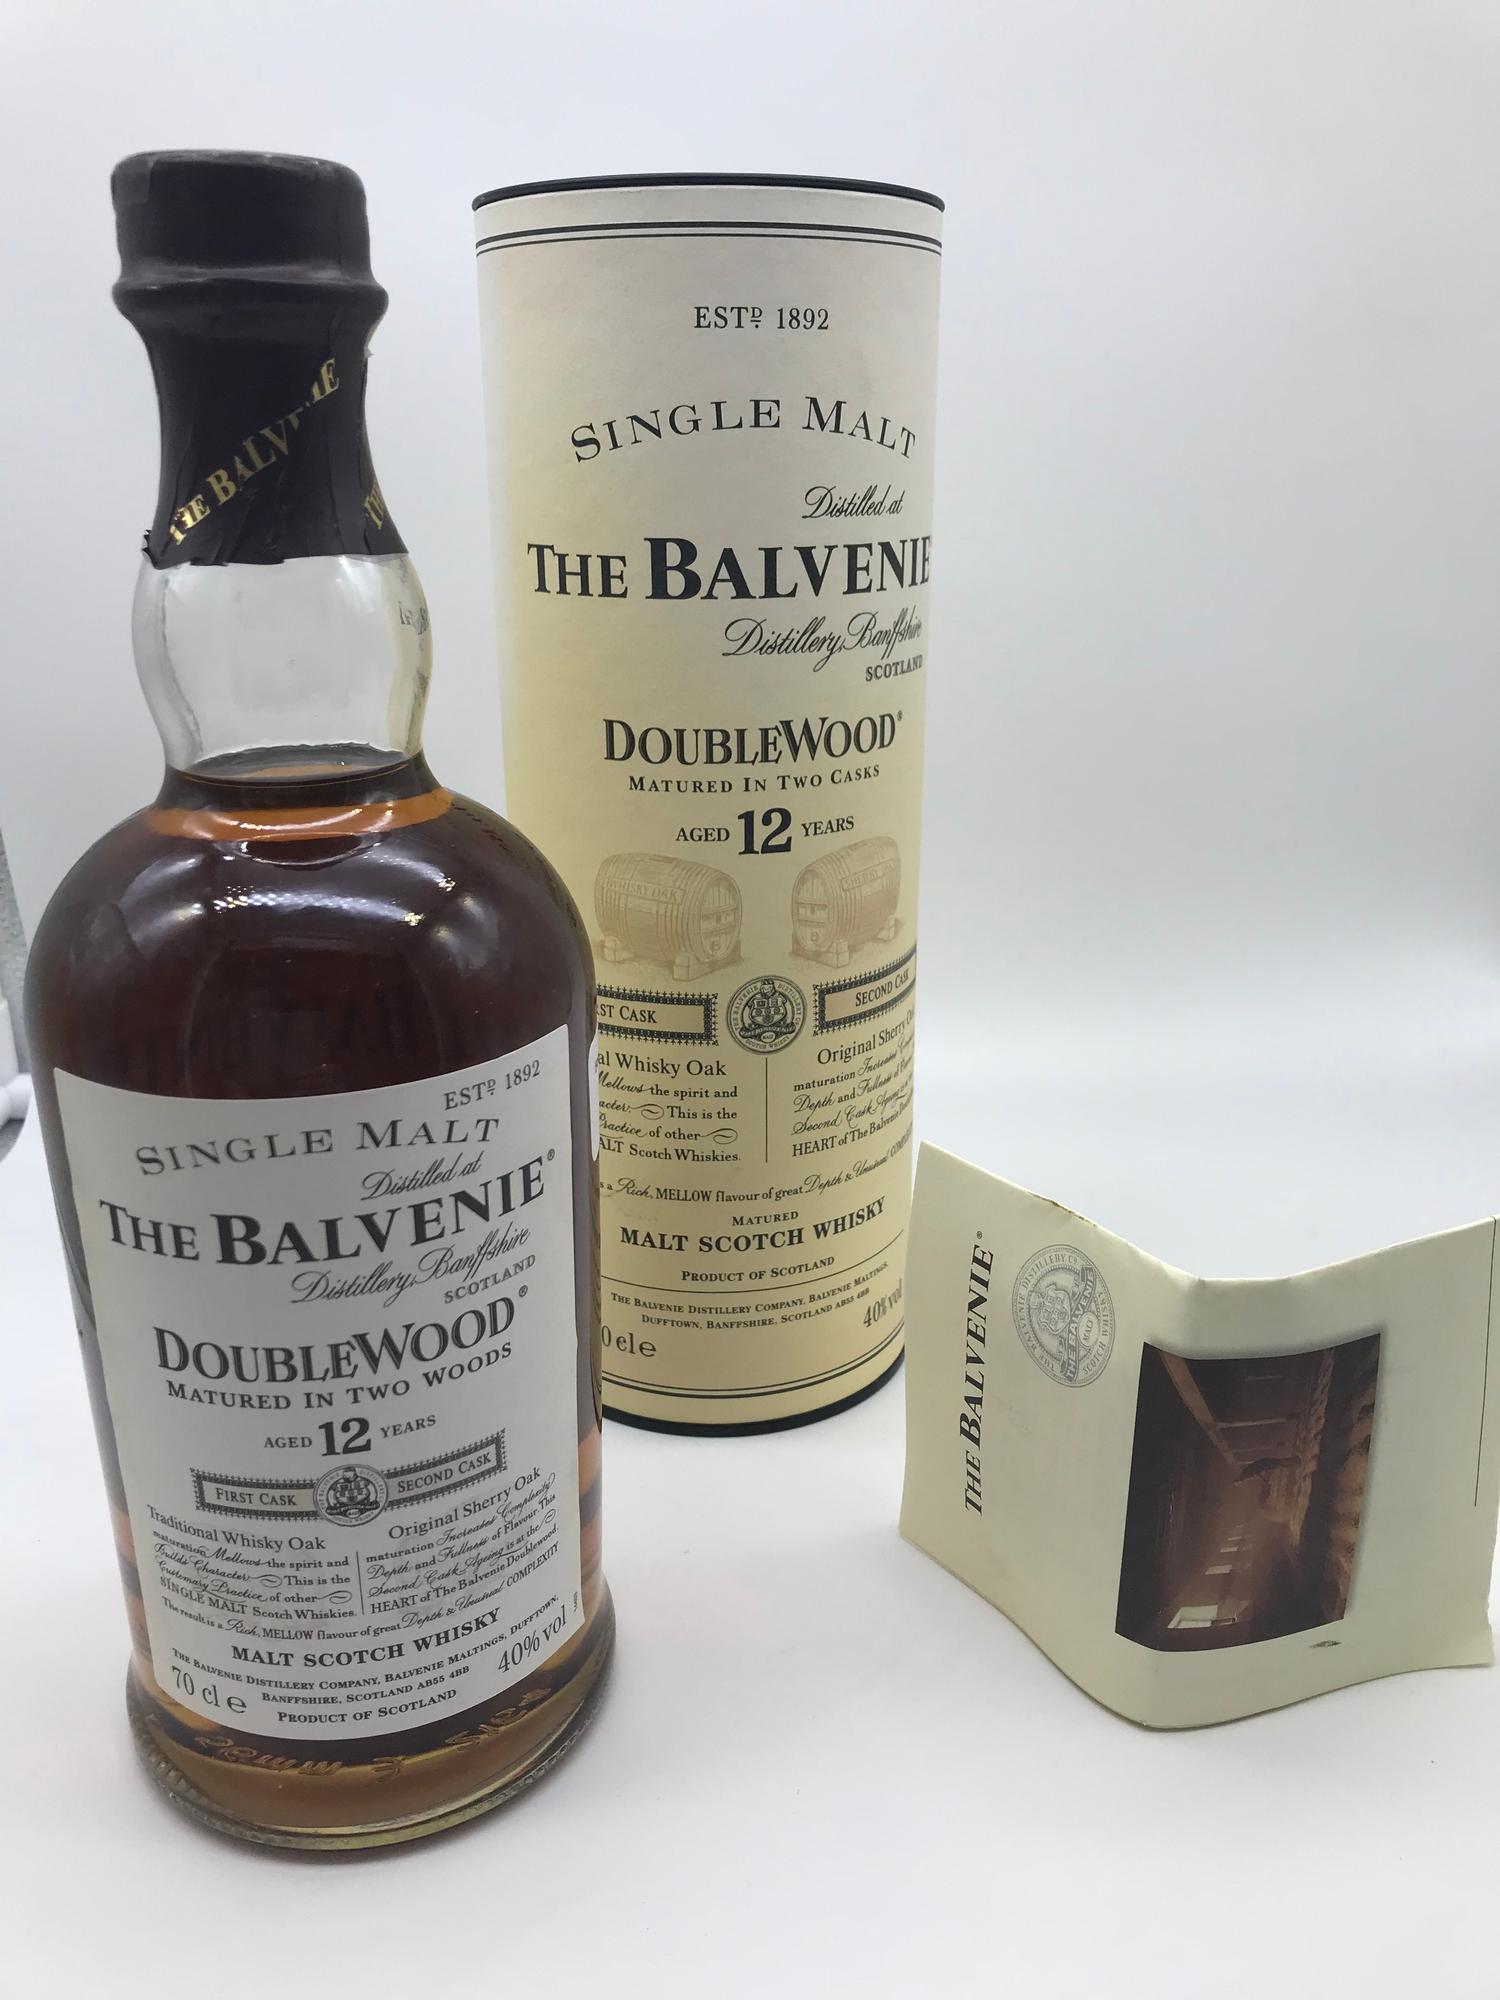 Balvenie Doublewood 12 year old whisky (full, sealed and boxed)